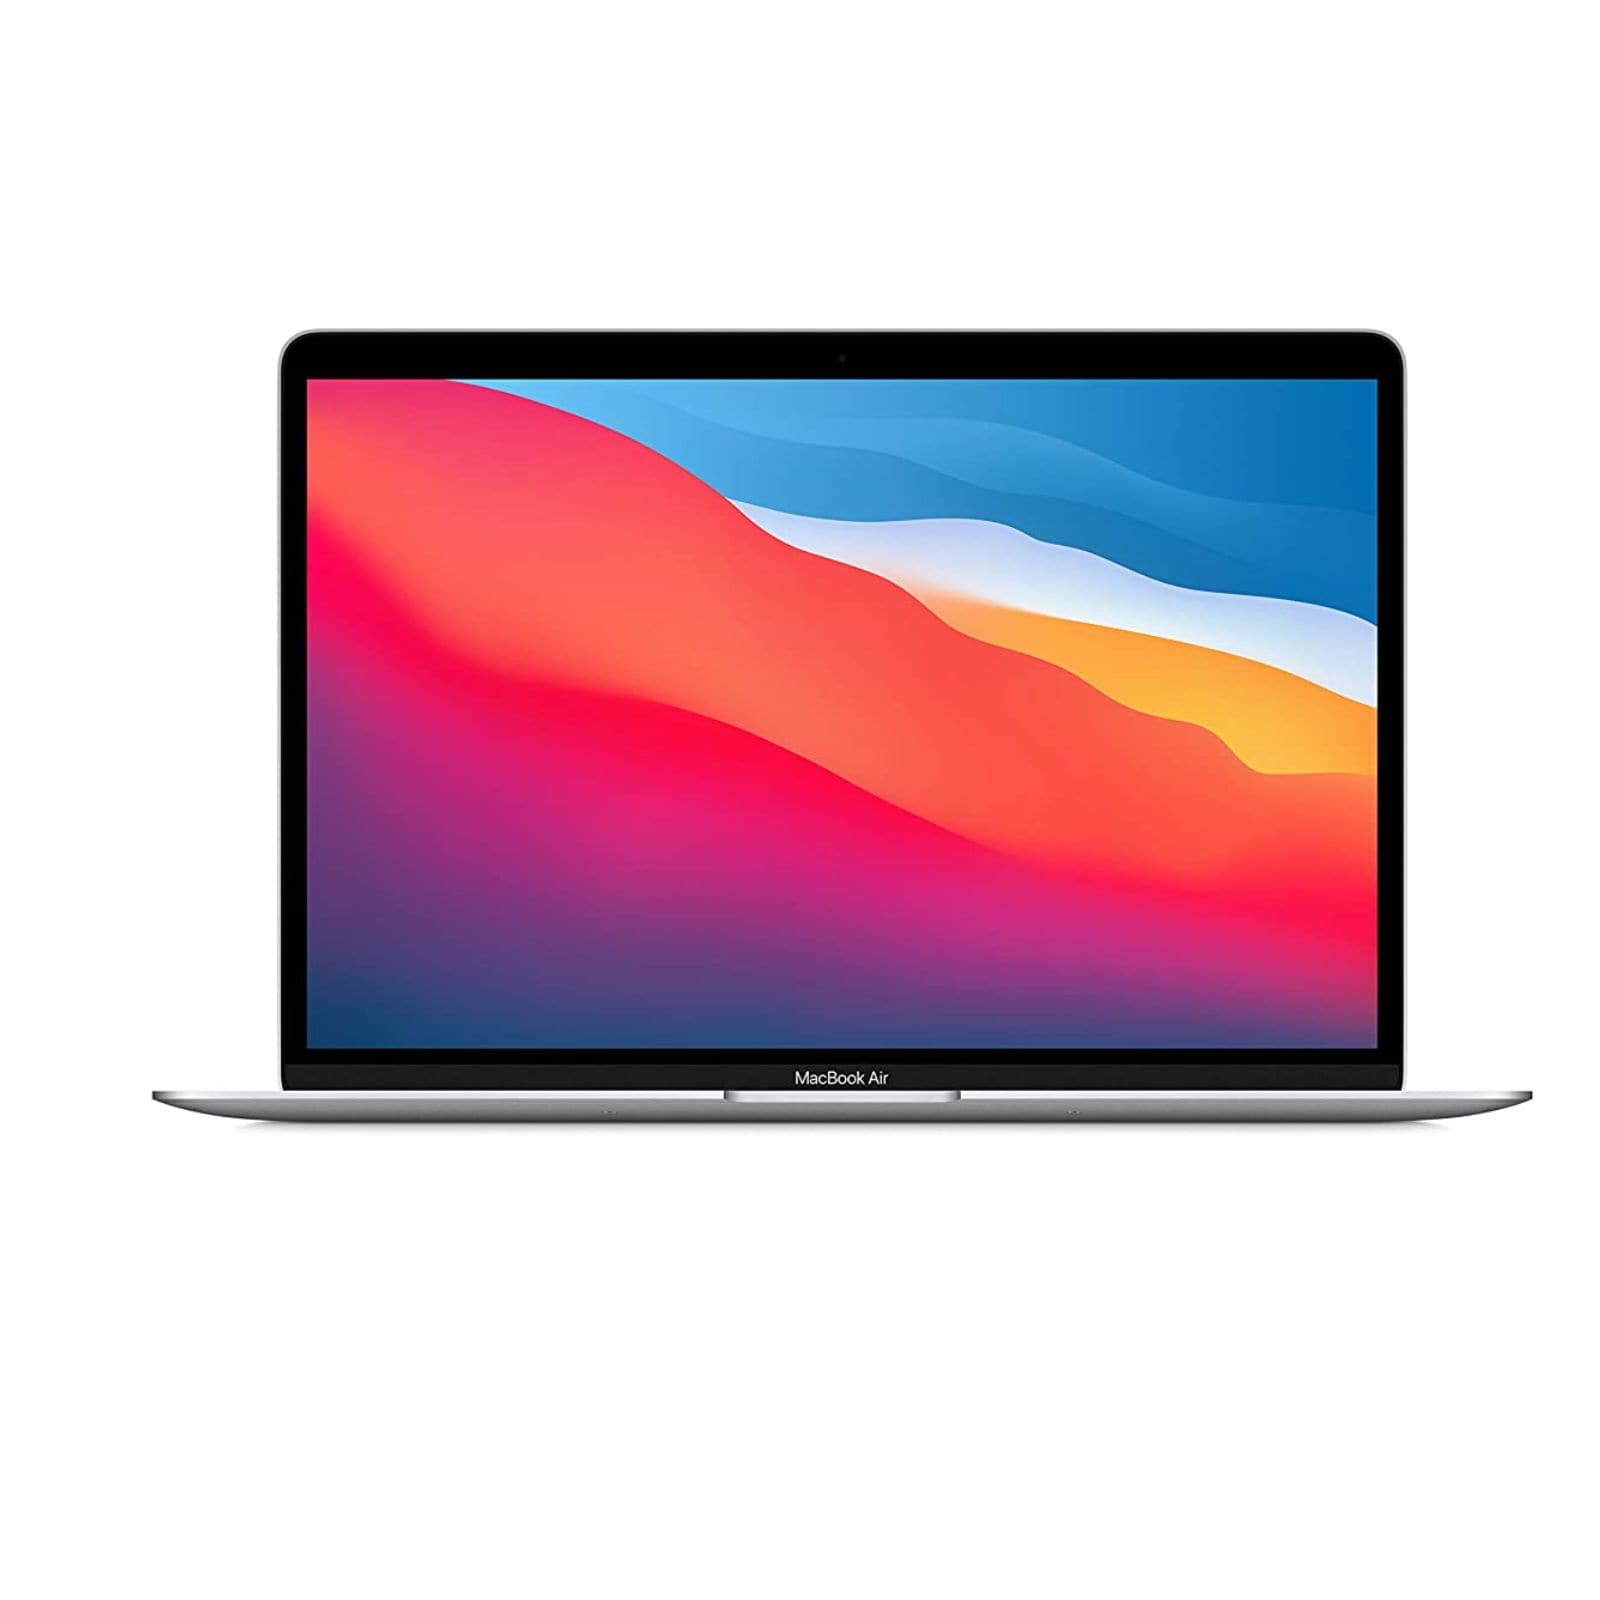 15.5-Inch MacBook Air Expected to Launch in Spring 2023 - MacRumors